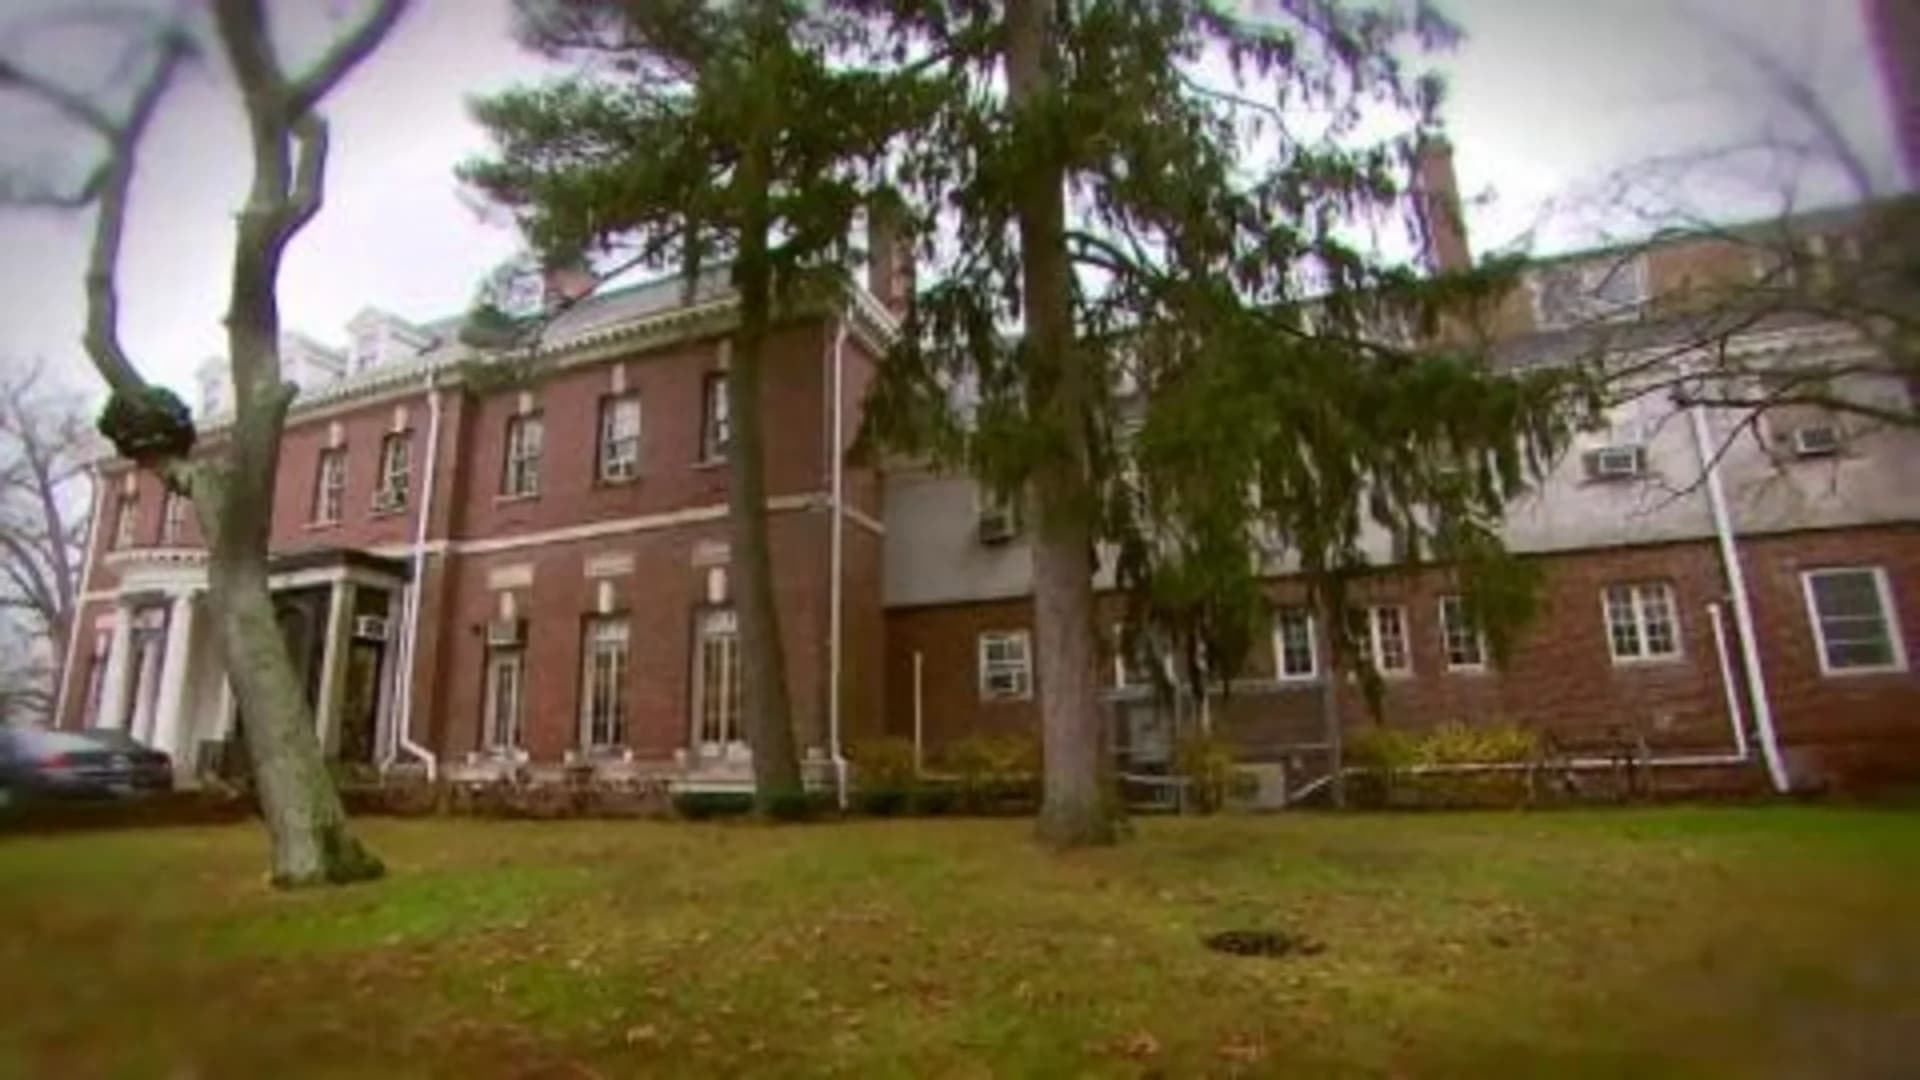 Long Island's Hidden Past: Christmas time for orphans at Brookwood Hall